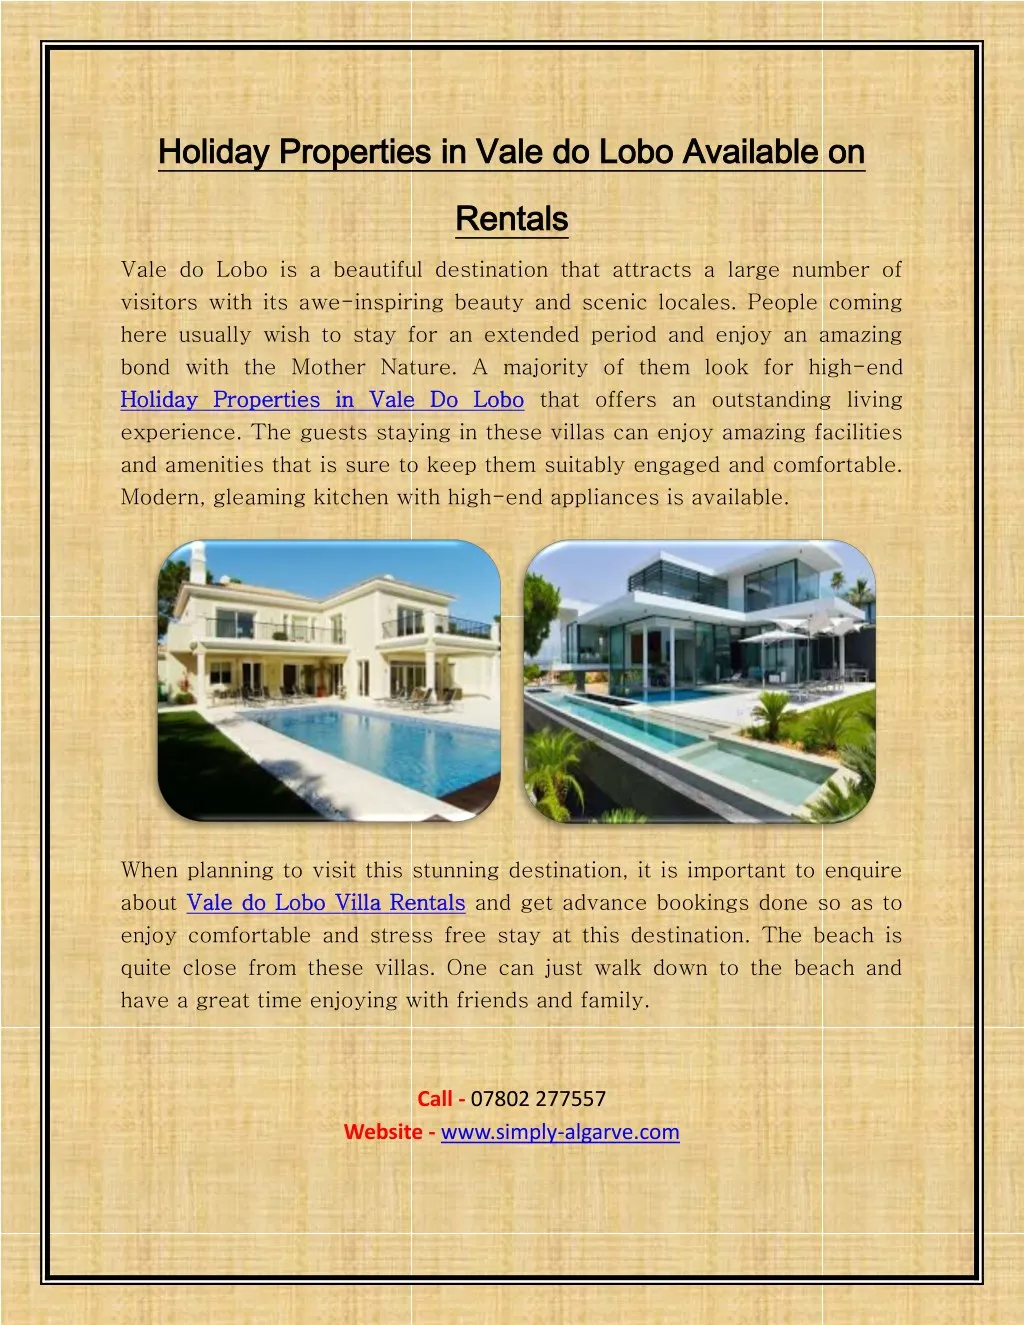 holiday properties in vale do lobo available